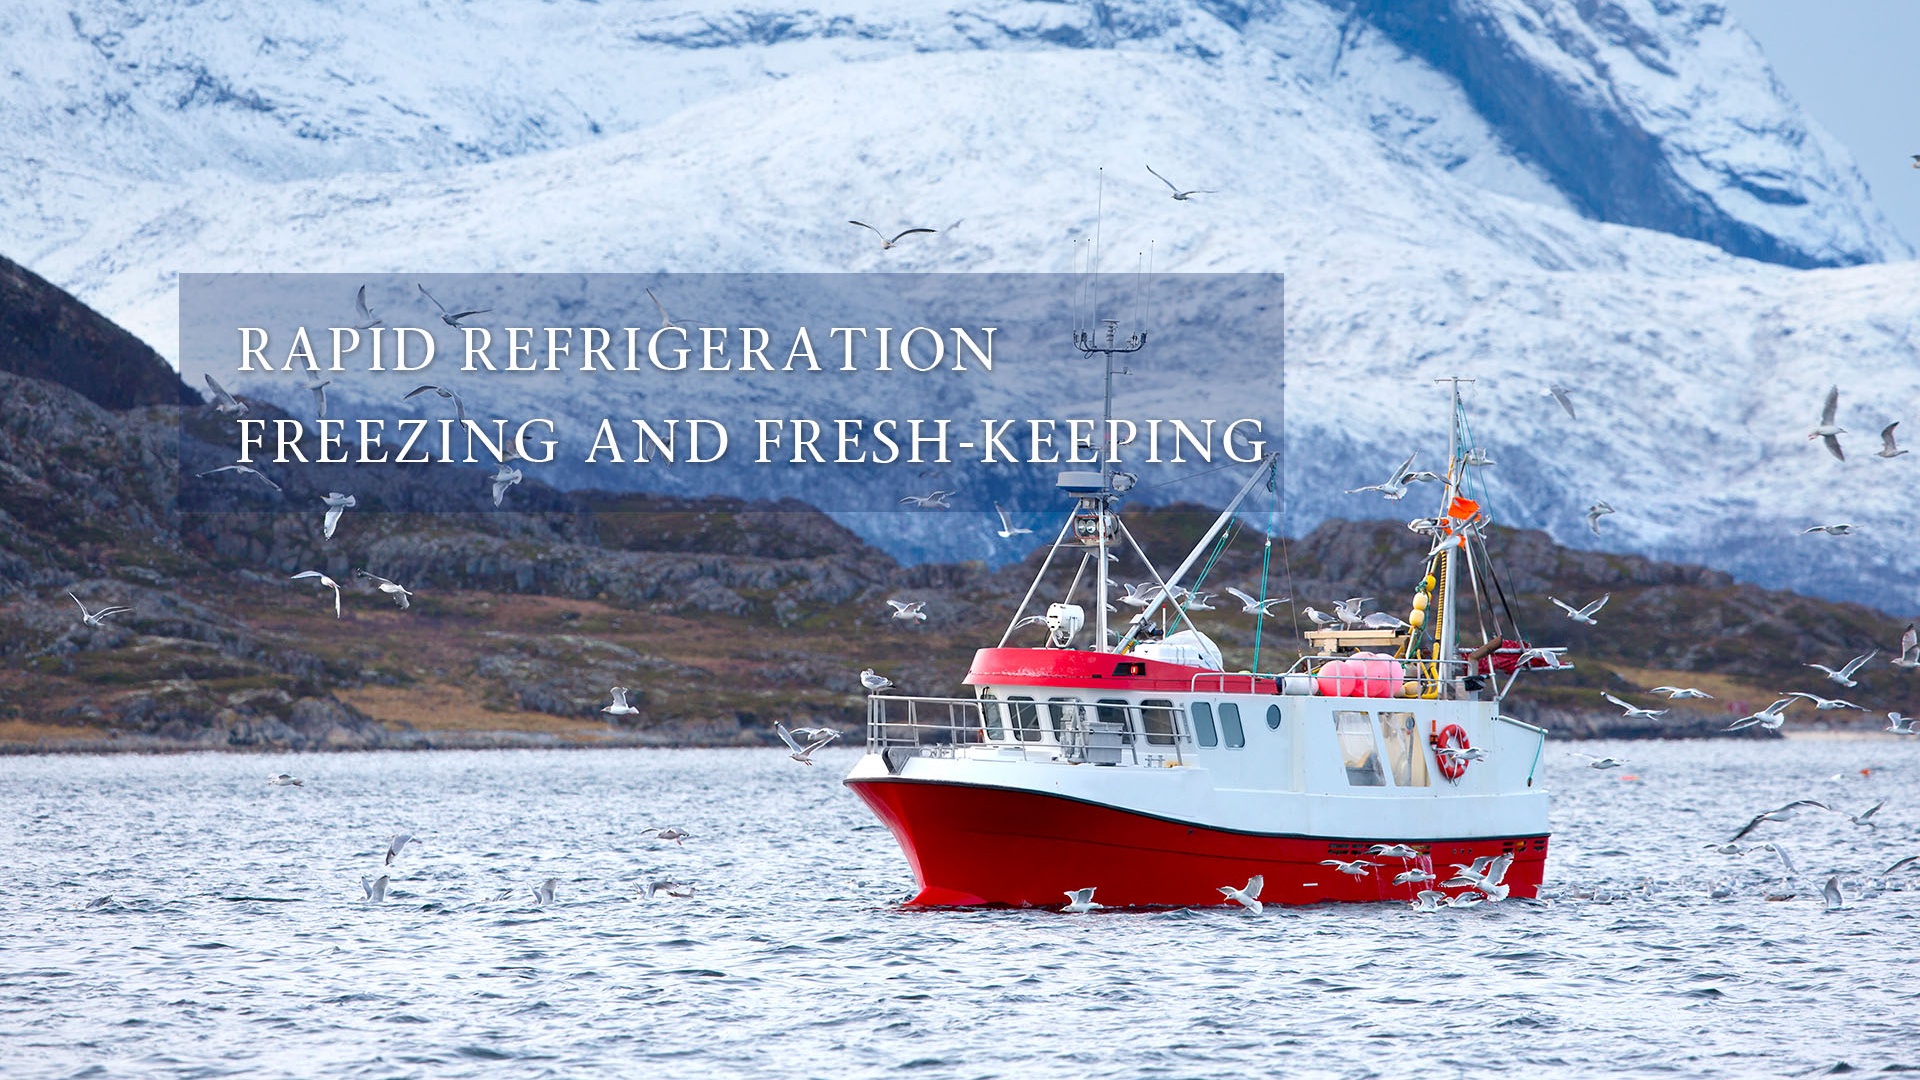 Ice making, refrigerating and preserving